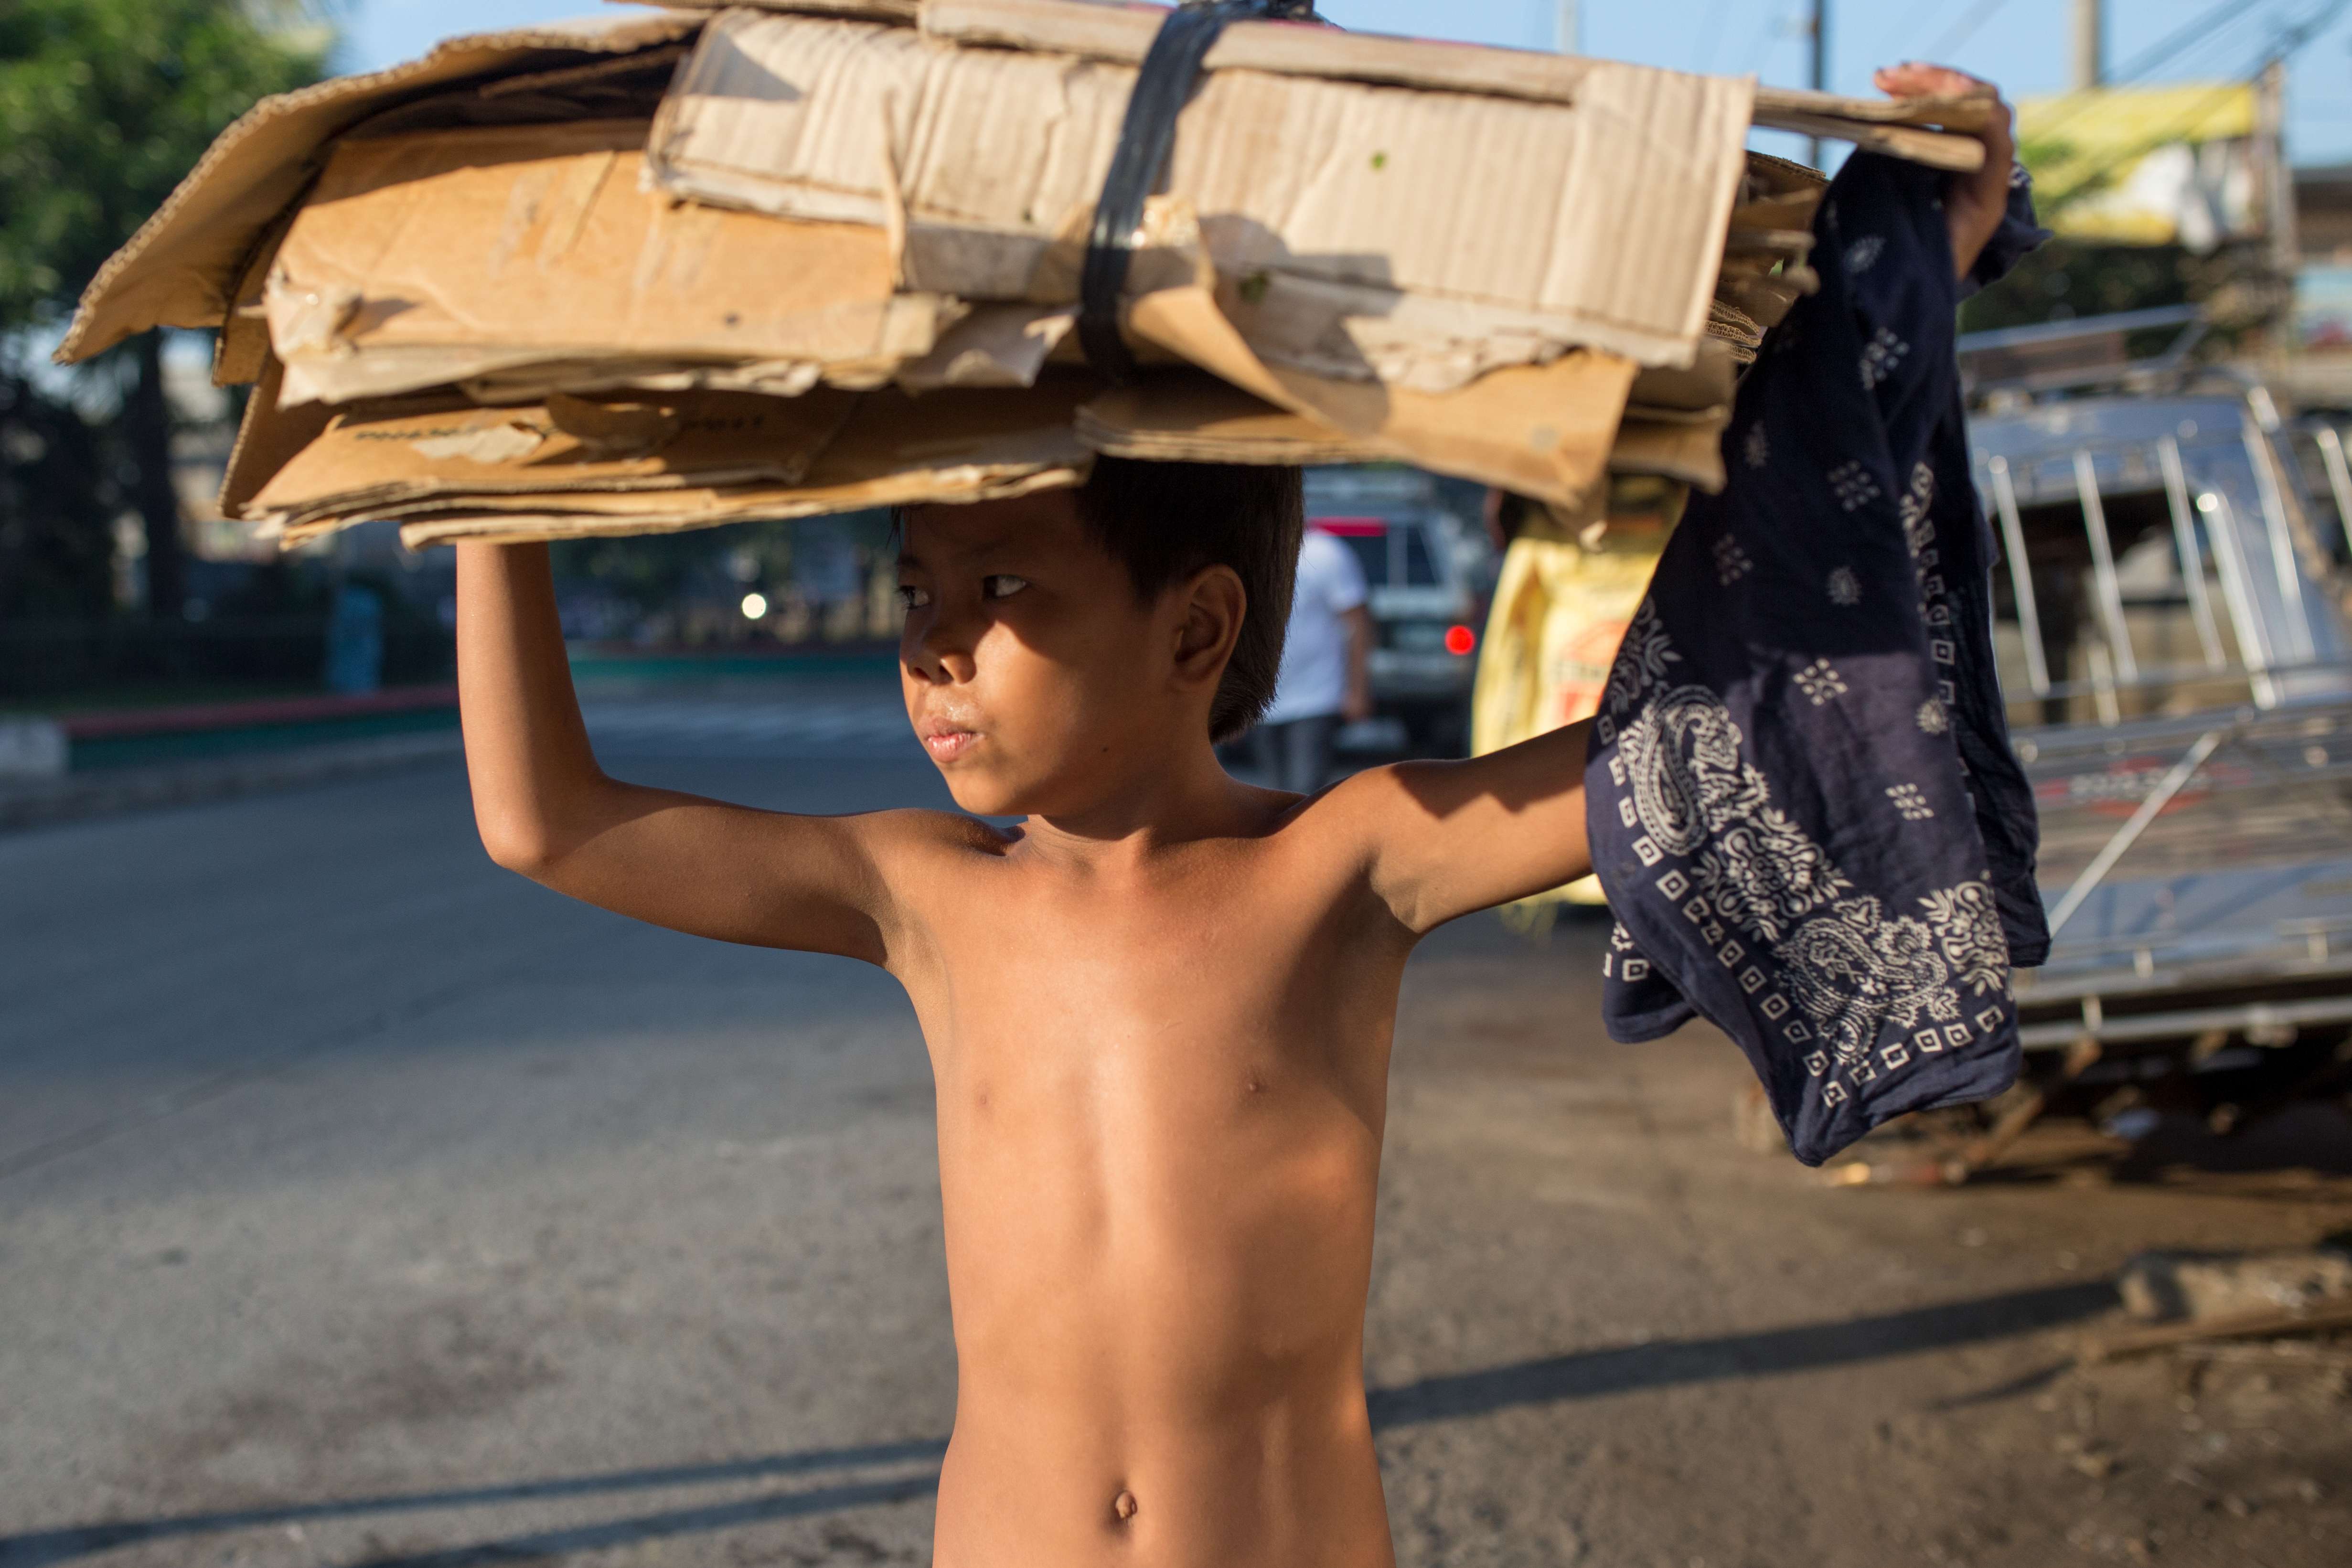 Children in Manila’s poorest neighbourhoods are paying an especially heavy price for the anti-drugs campaign of the Philippine president, which has taken thousands of lives since he came to power. Photographs by Paul Ratje